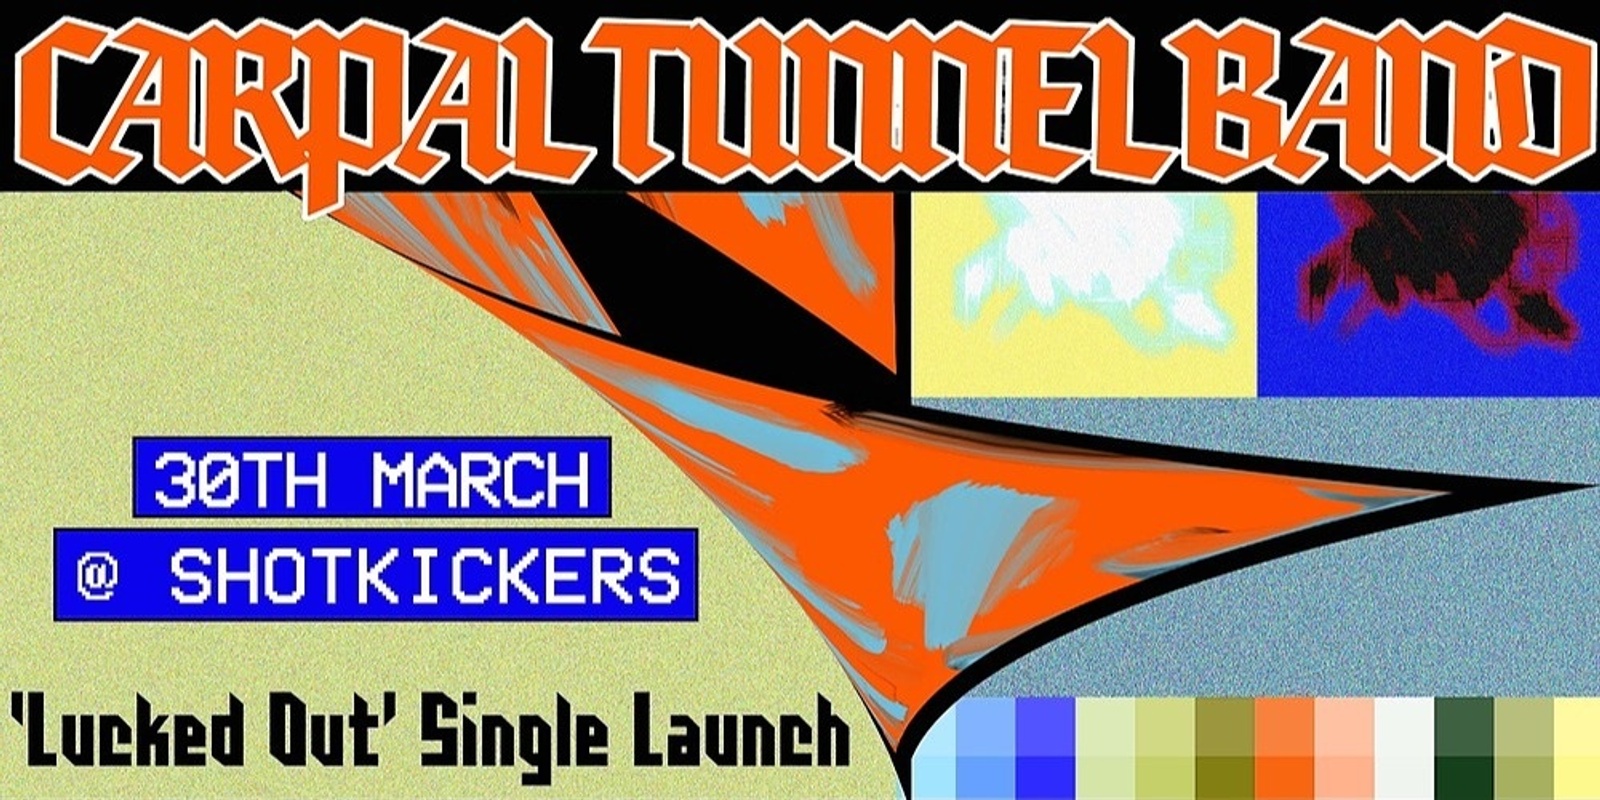 Carpal Tunnel 'Lucked Out' Single Launch